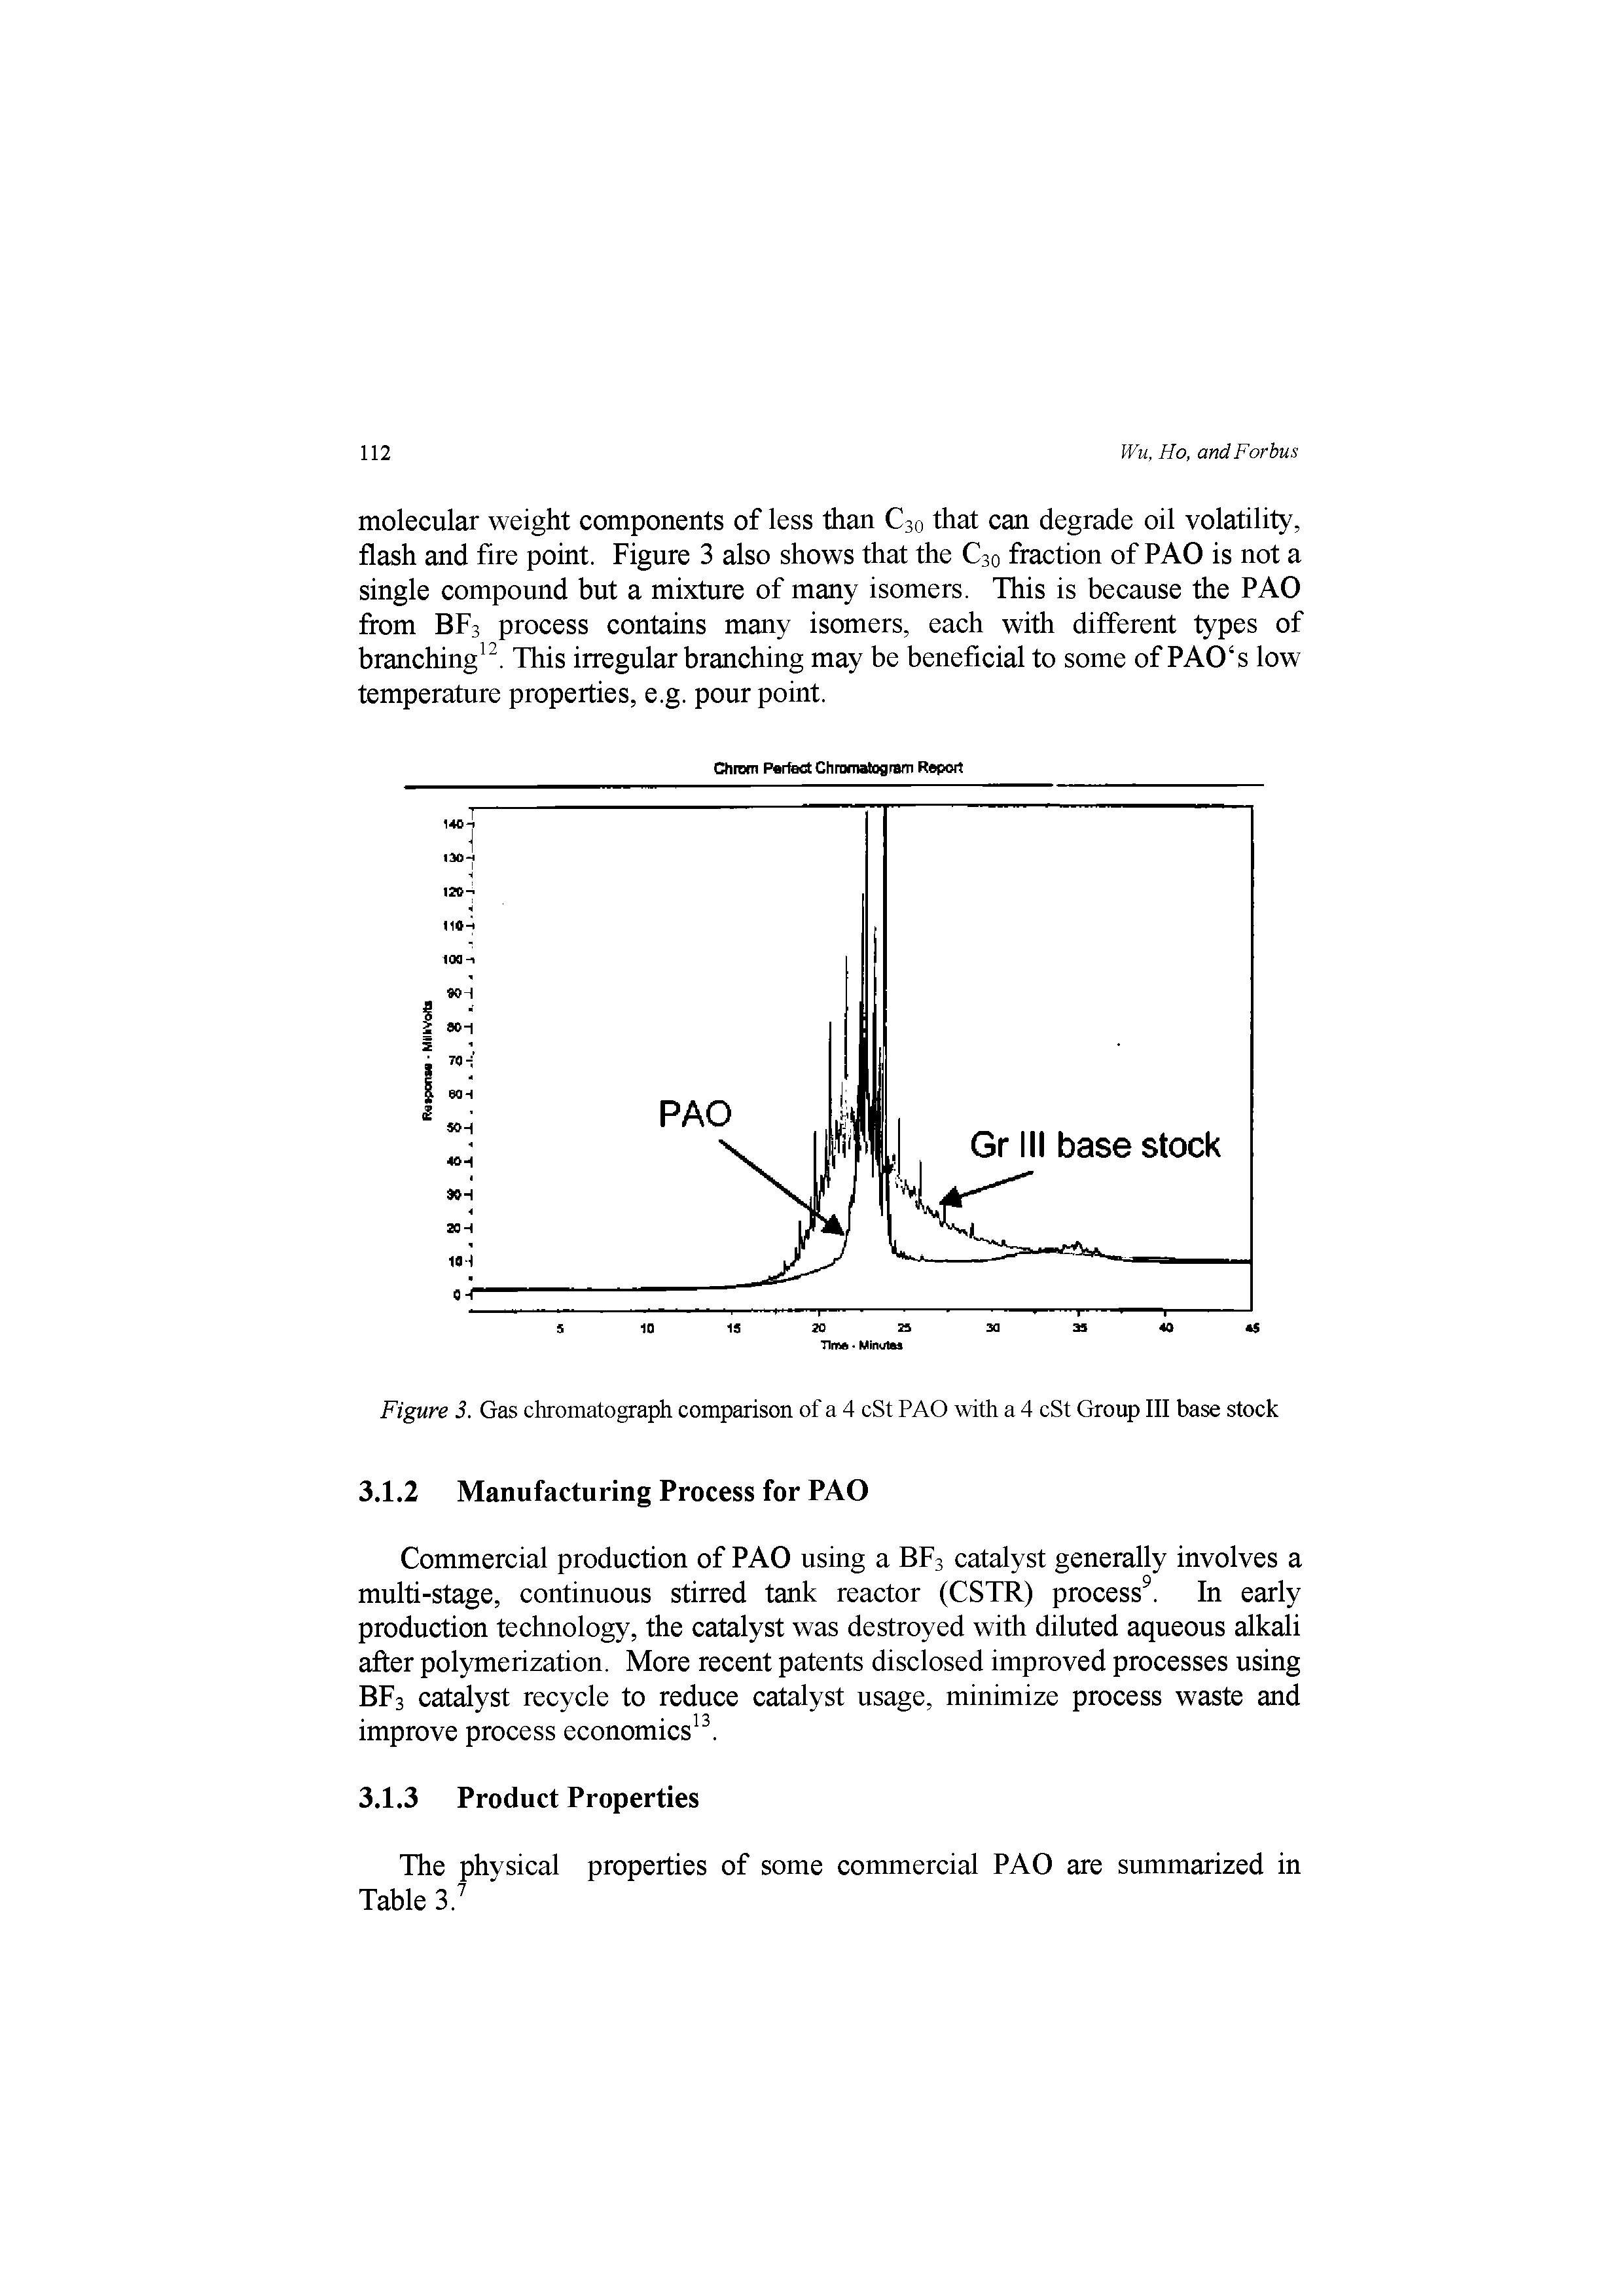 Figure 3. Gas chromatograph comparison of a 4 cSt PAO with a 4 cSt Group III base stock...